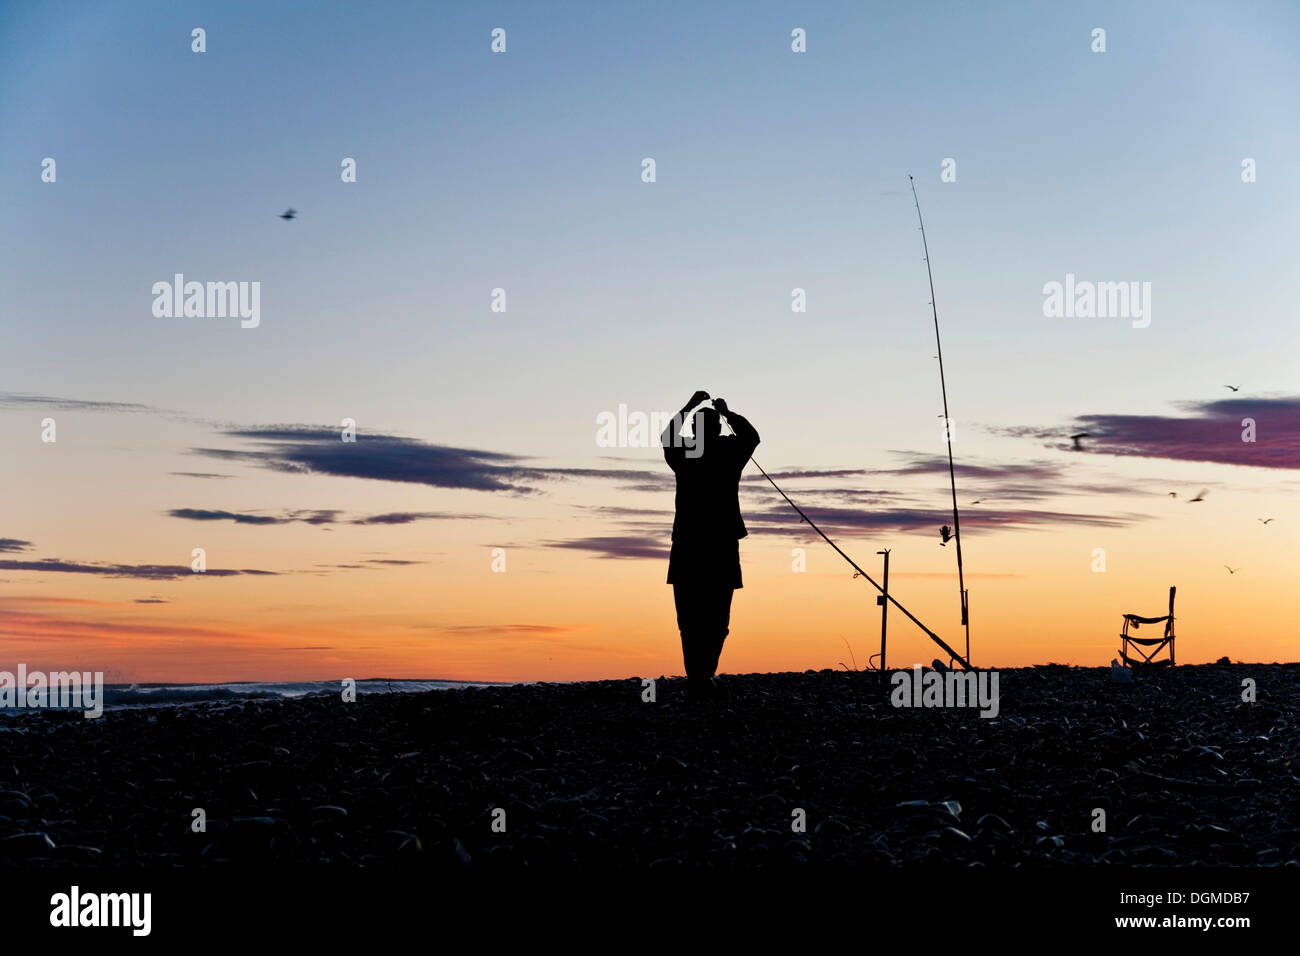 A fisherman at dawn, Cape Kidnappers, Hawke's Bay, New Zealand Stock Photo